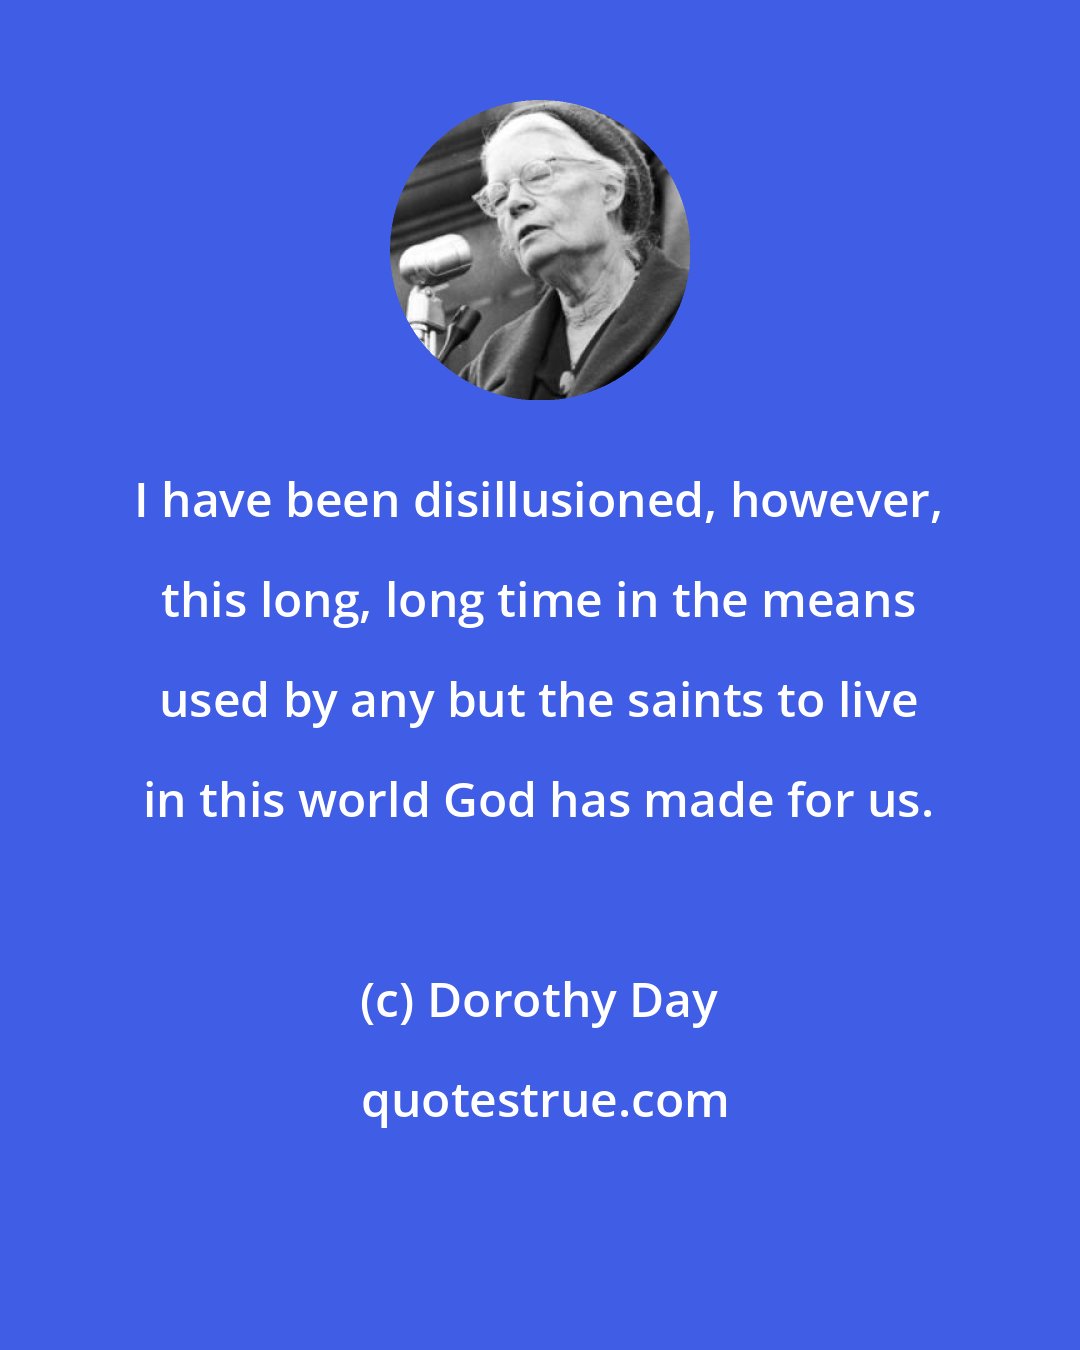 Dorothy Day: I have been disillusioned, however, this long, long time in the means used by any but the saints to live in this world God has made for us.